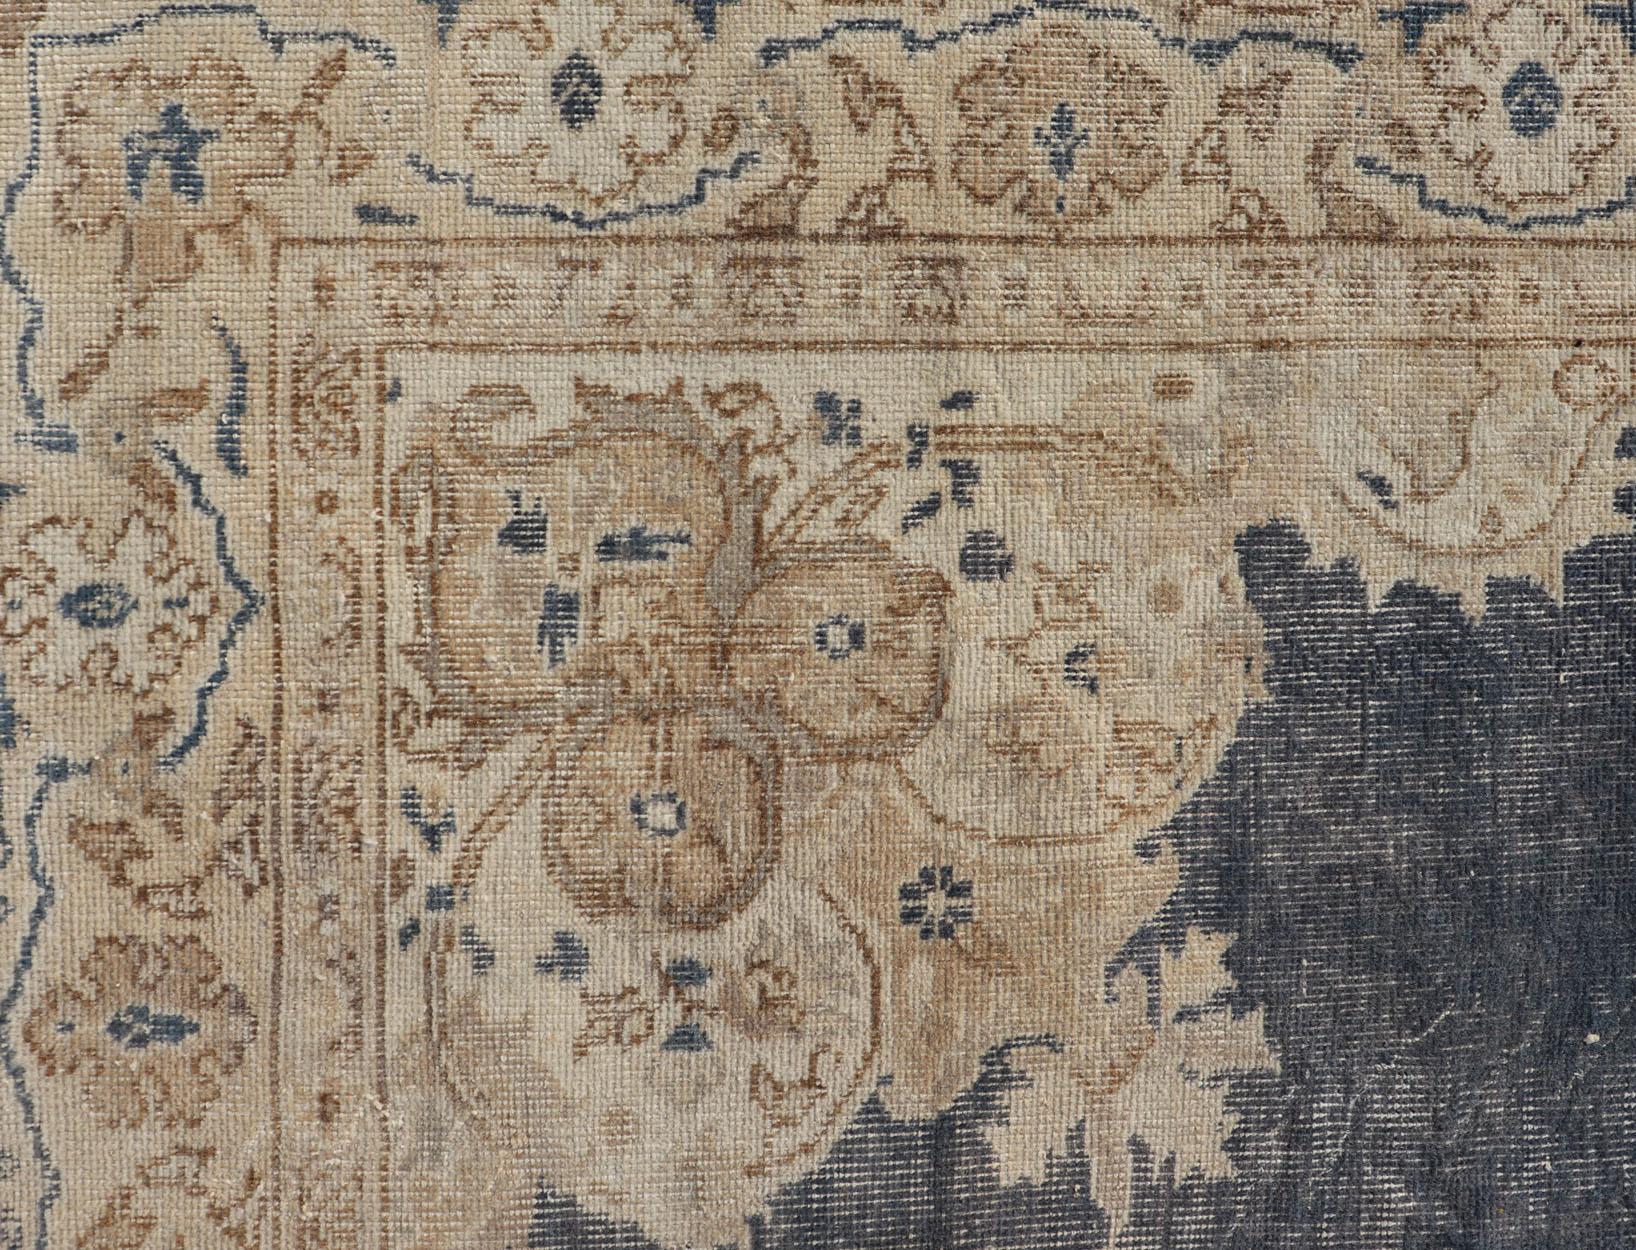 Oushak Distressed Turkish Carpet with Floral Design in Blue, Tan, Taupe, and Cream For Sale